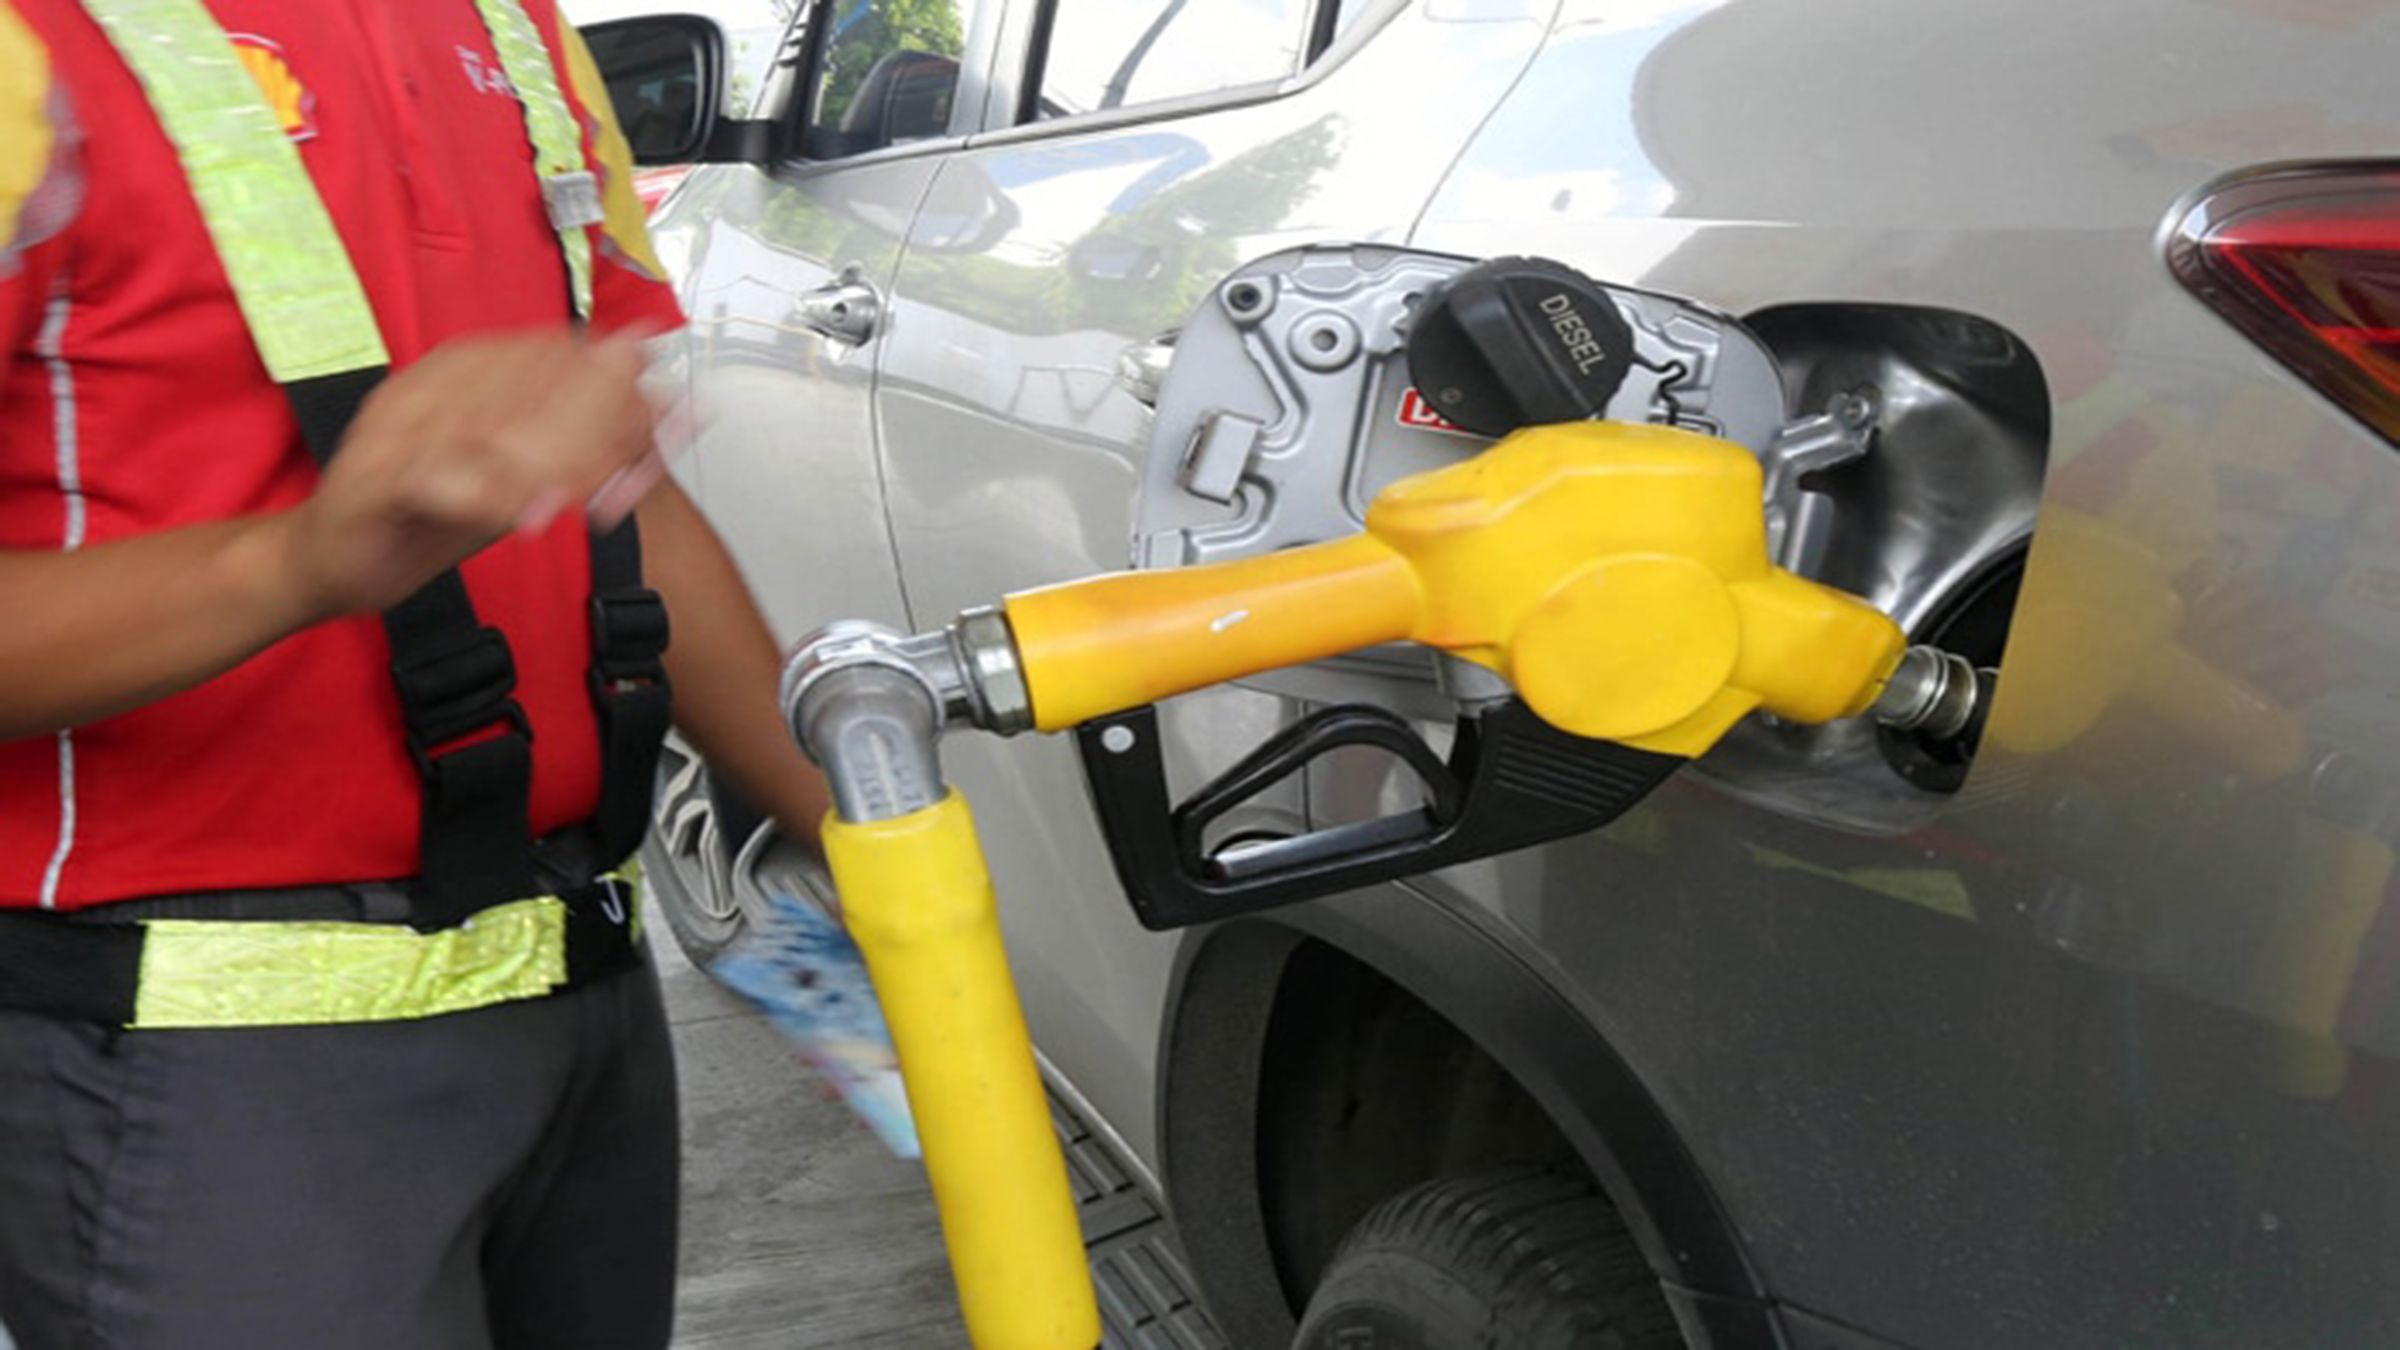 Diesel prices continue to decline, while gasoline may rise